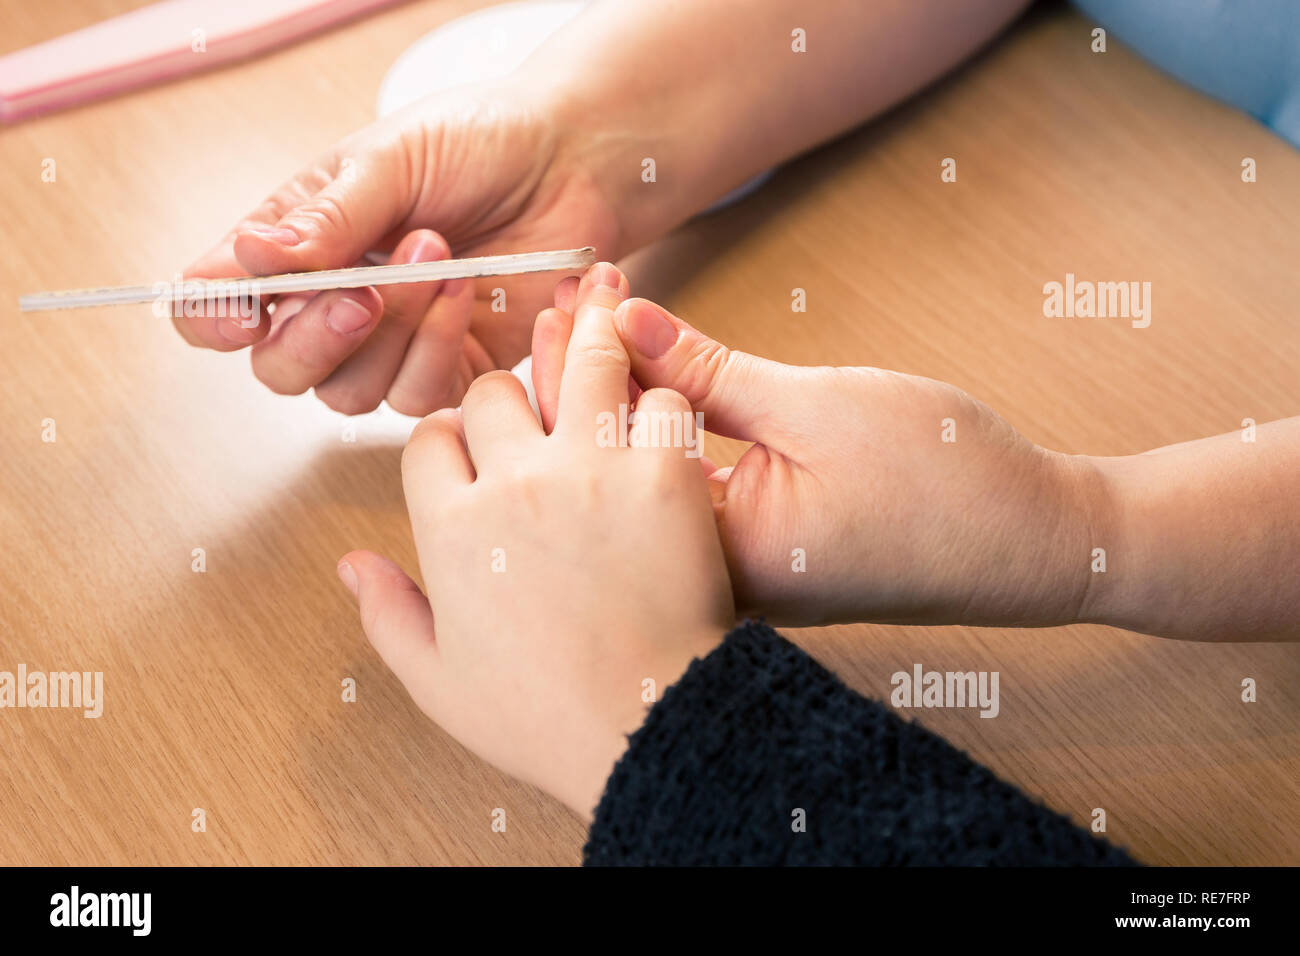 Filing nails of young girl at the kichen table, close up of the hands - horizontal Stock Photo